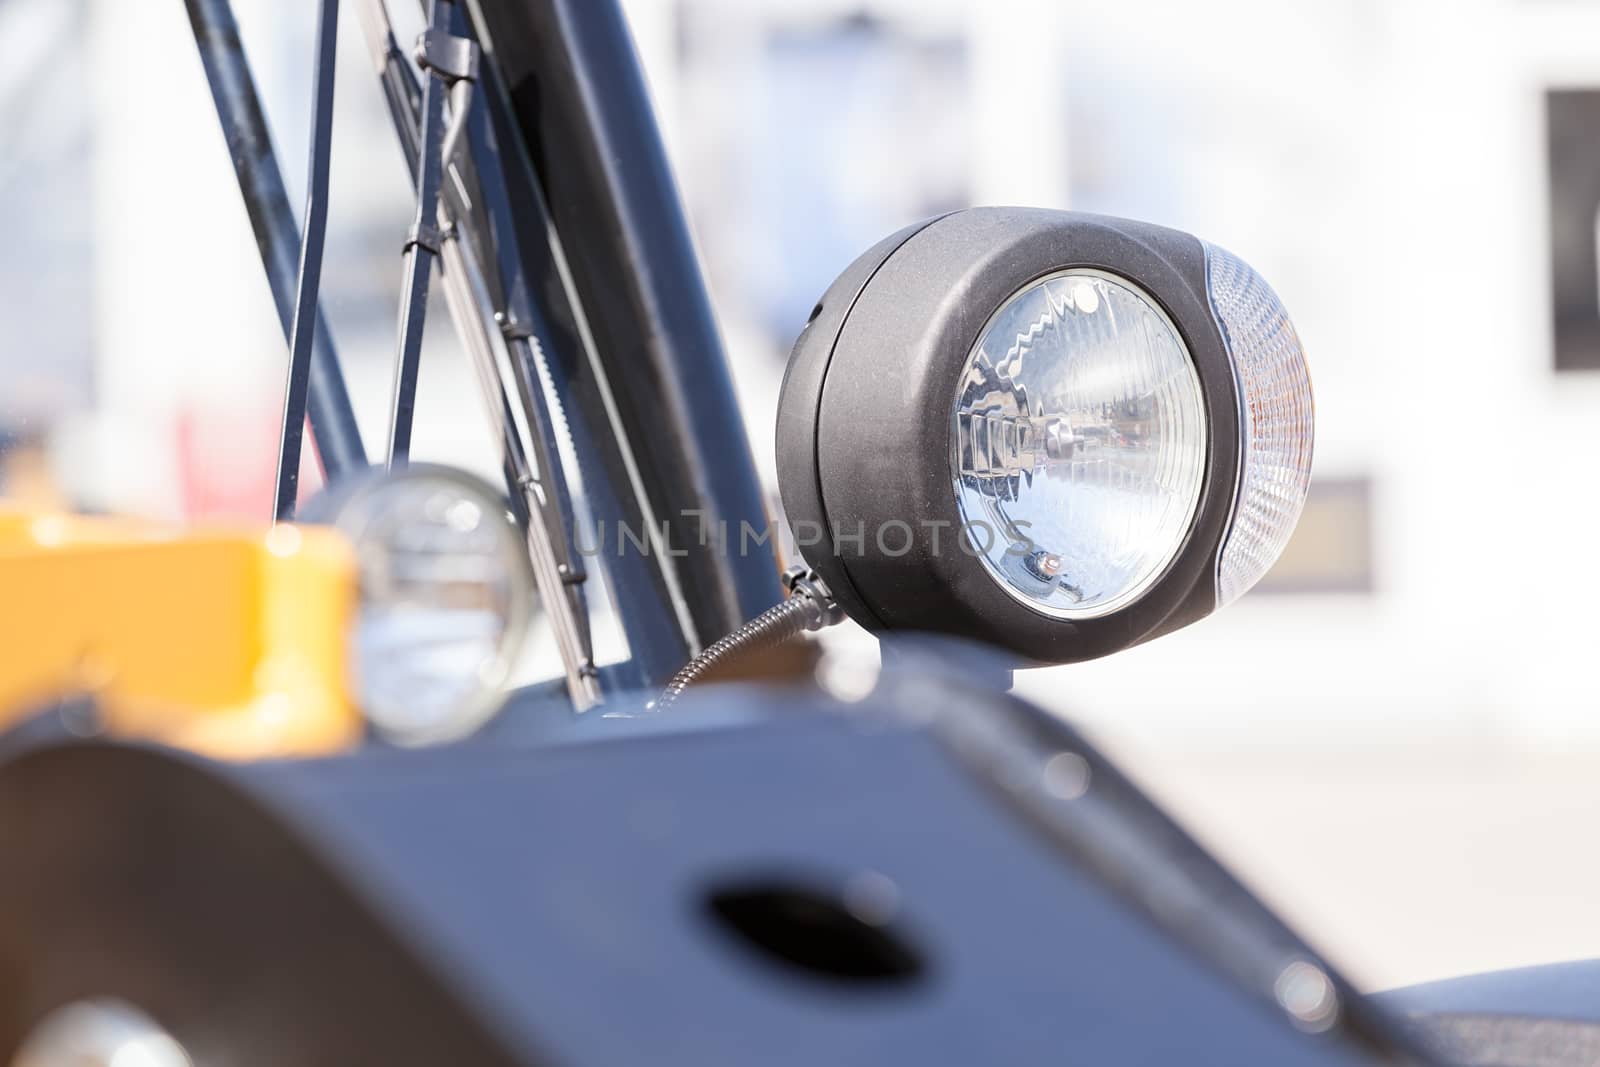 type headlights of the machine, note shallow depth of field